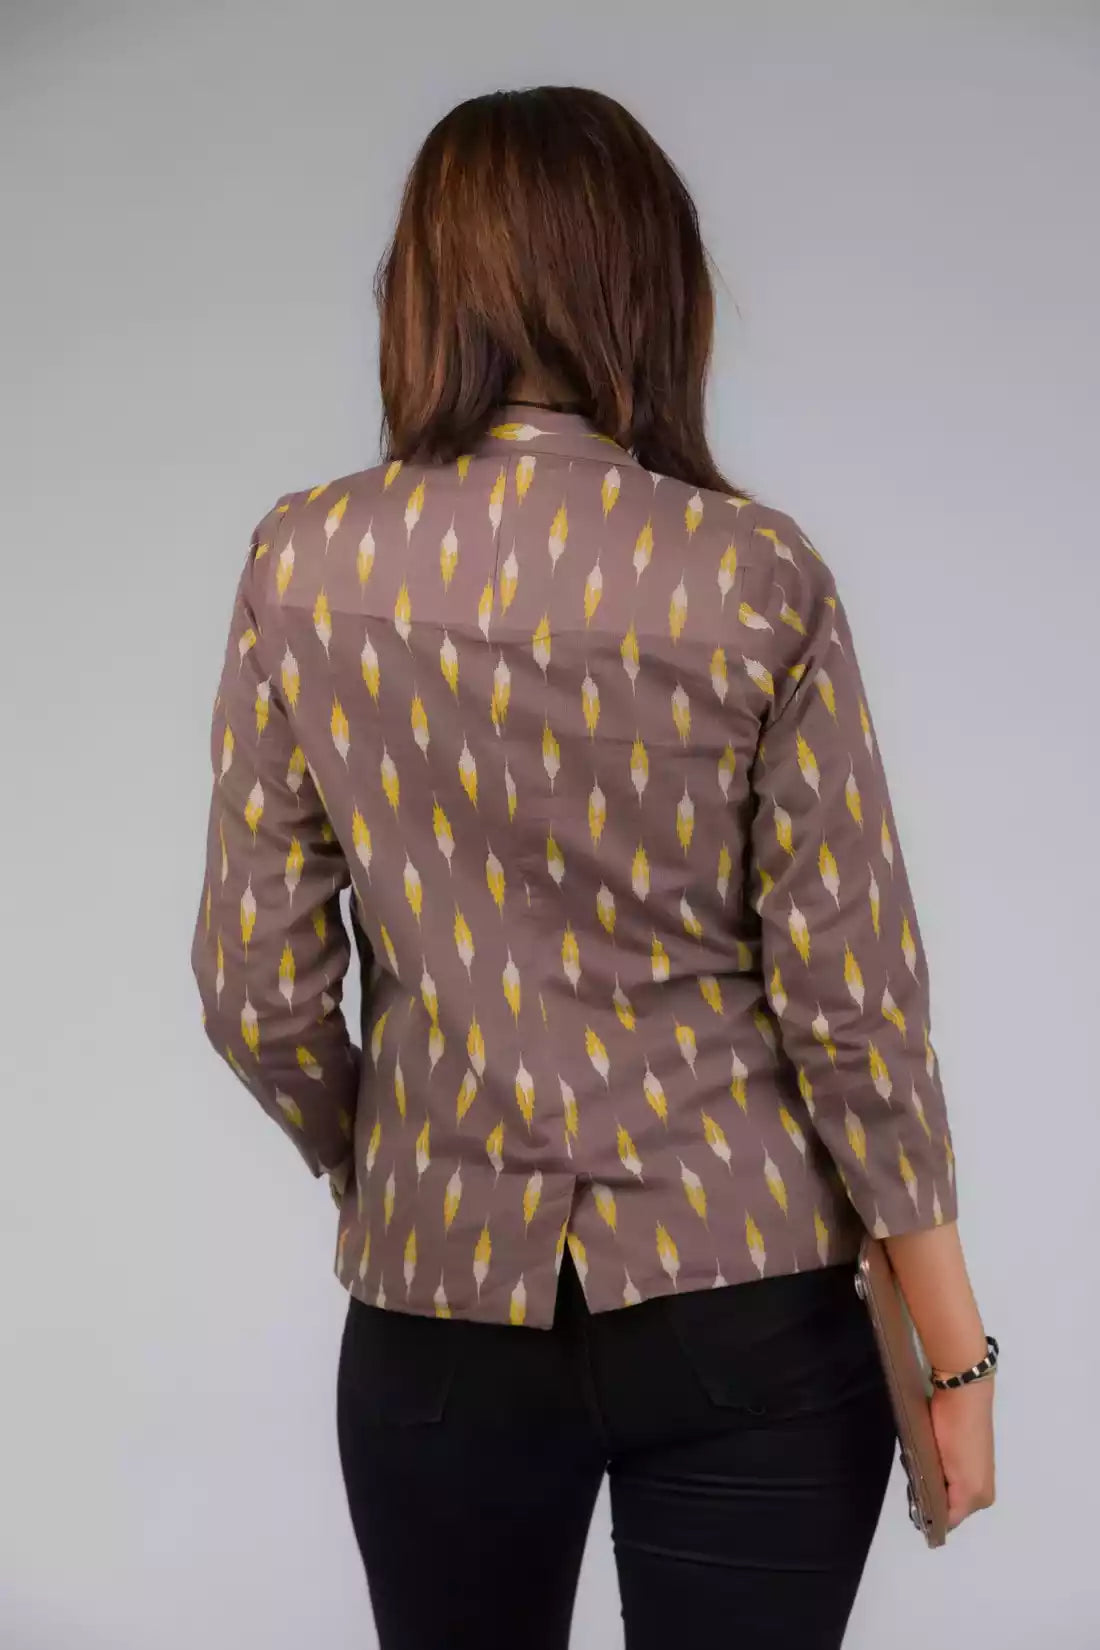 The view from back of Grey Yellow Ikkat Blazer In Pure Cotton, formal office wear for women